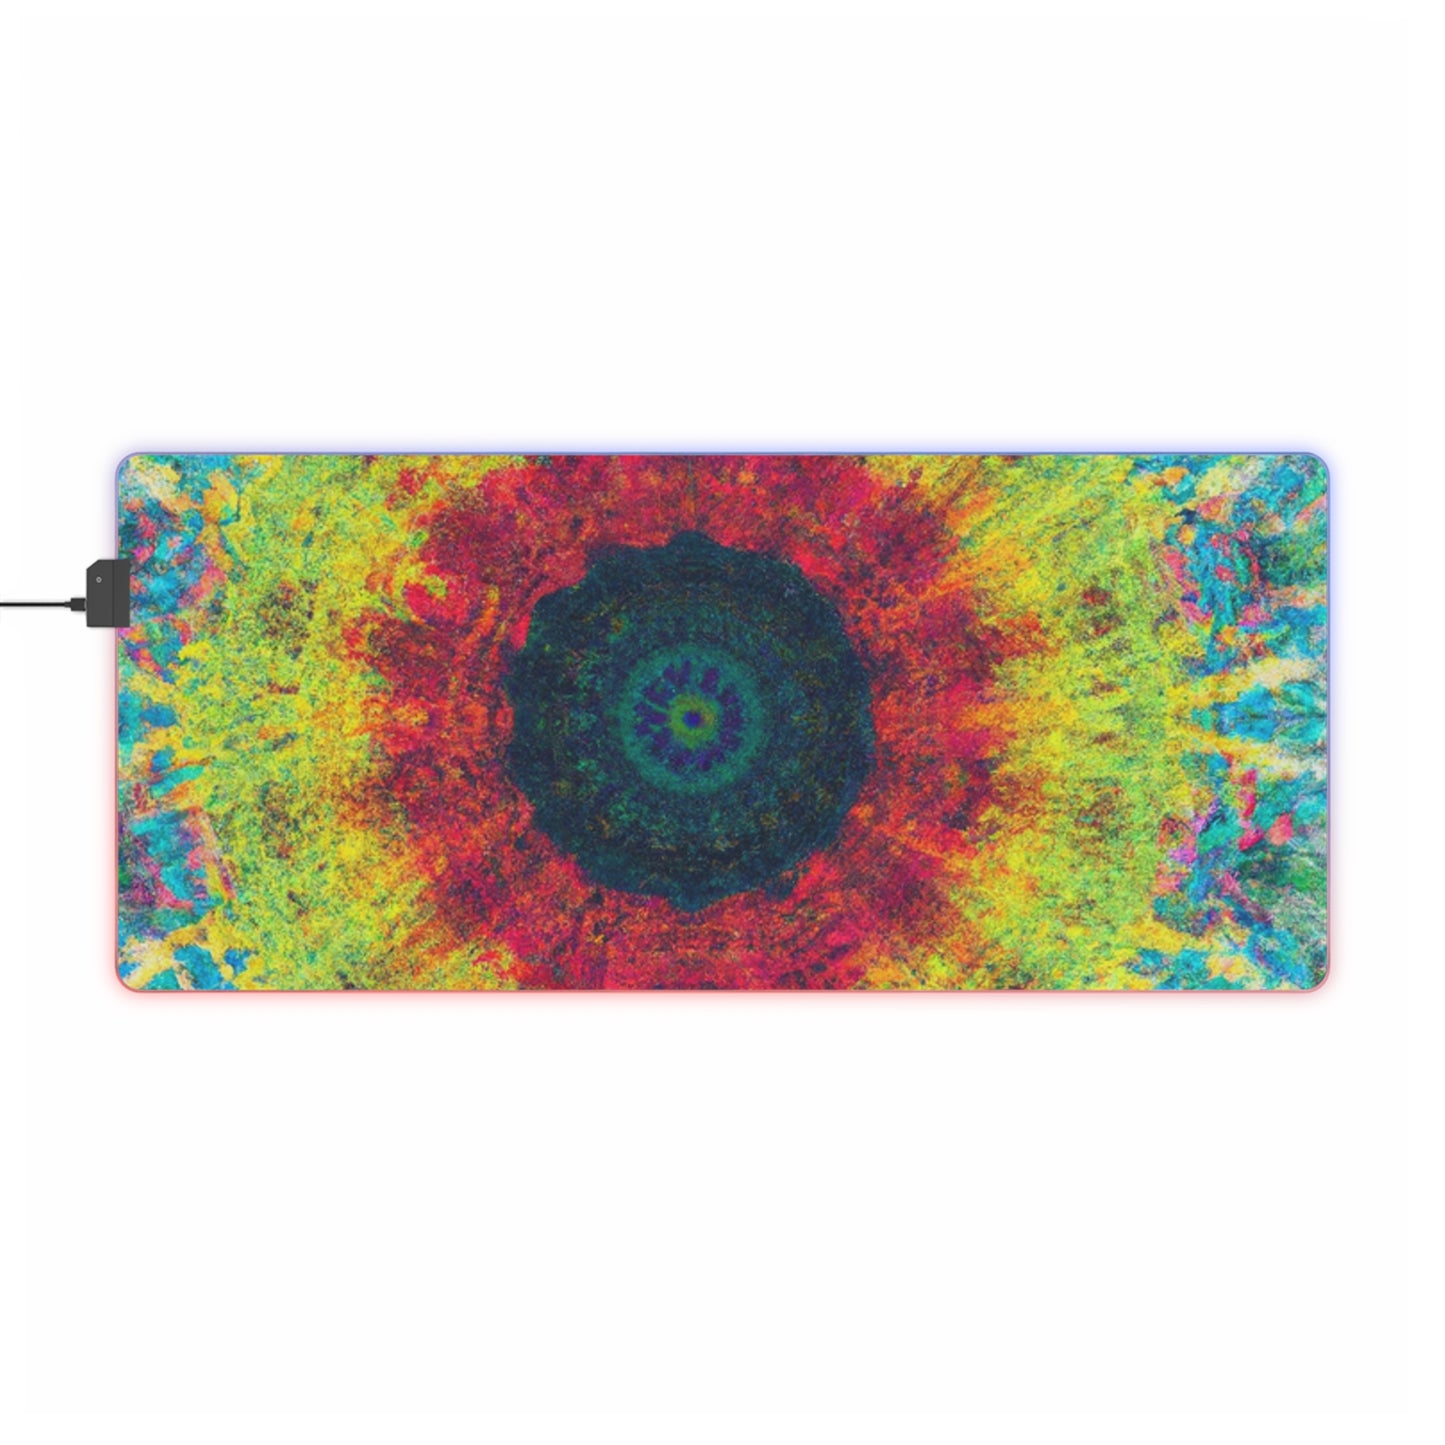 Rocky Rumblehot - Psychedelic Trippy LED Light Up Gaming Mouse Pad